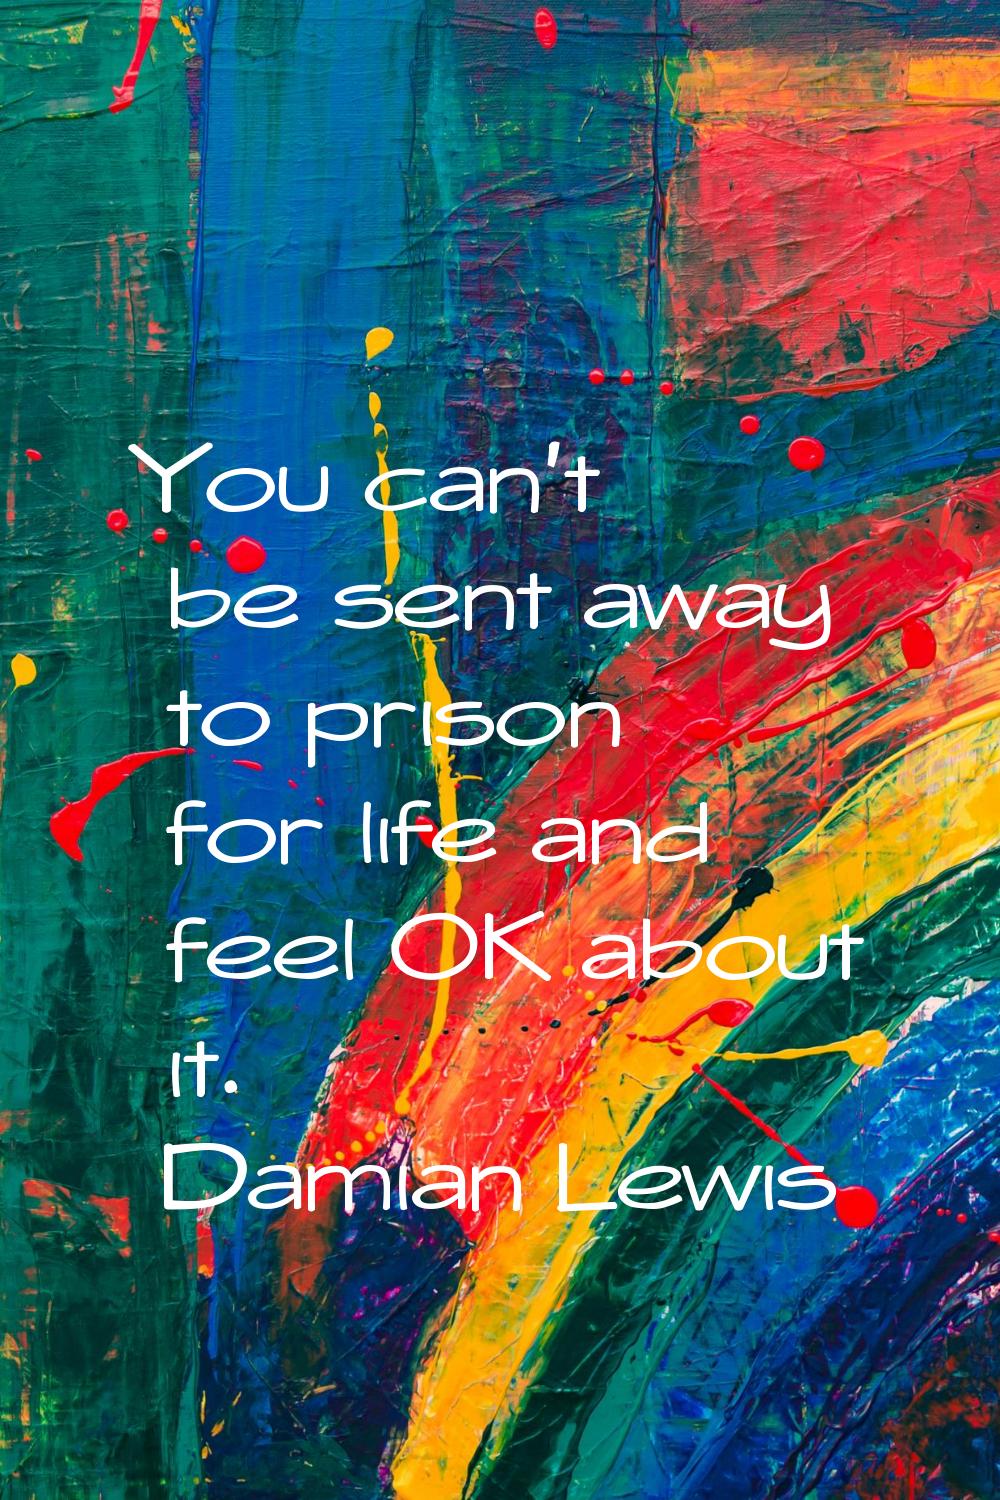 You can't be sent away to prison for life and feel OK about it.